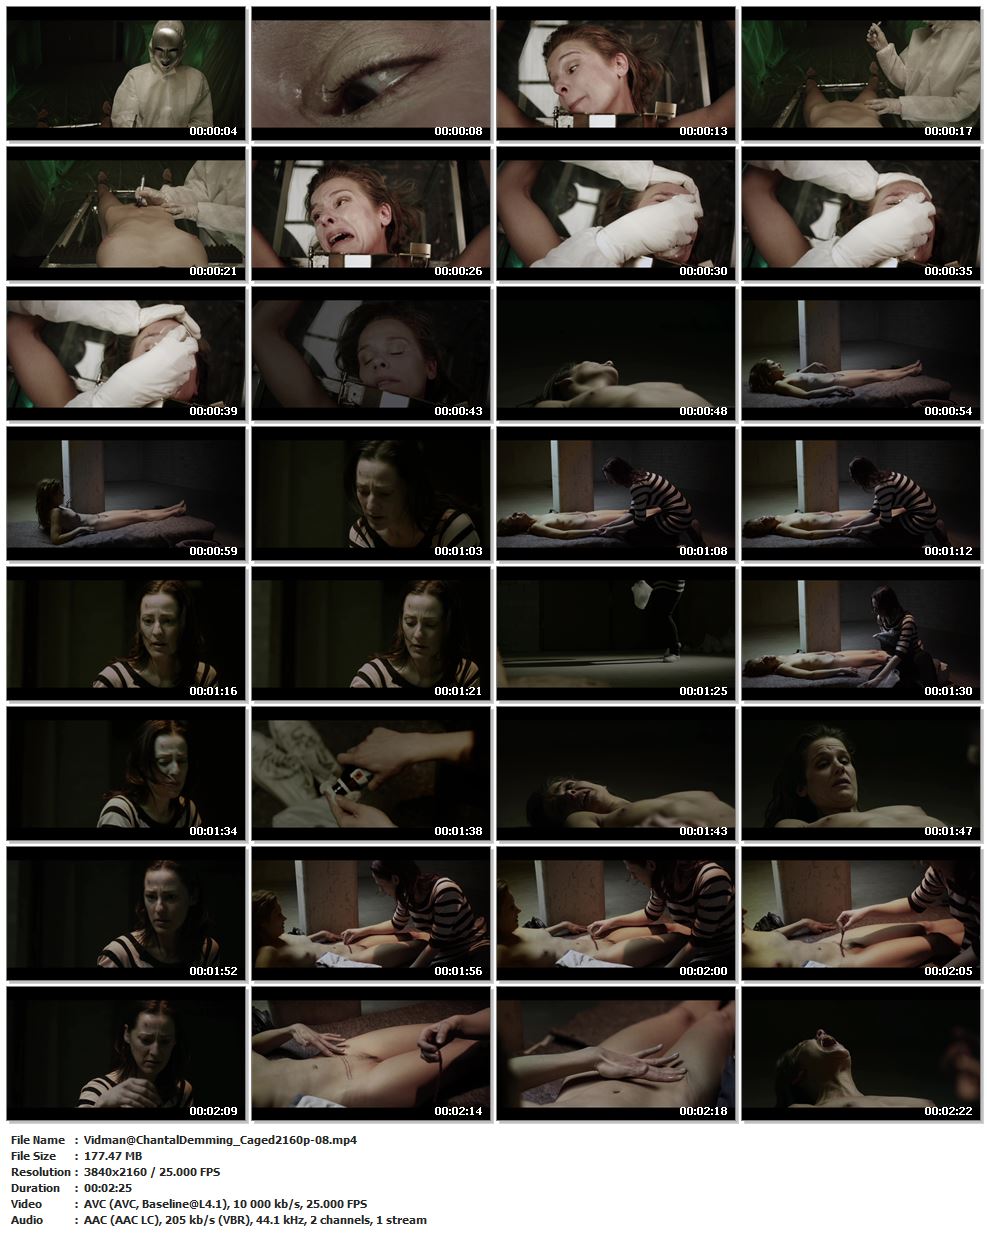 Chantal Demming mental torture in 'Caged' (2011) .